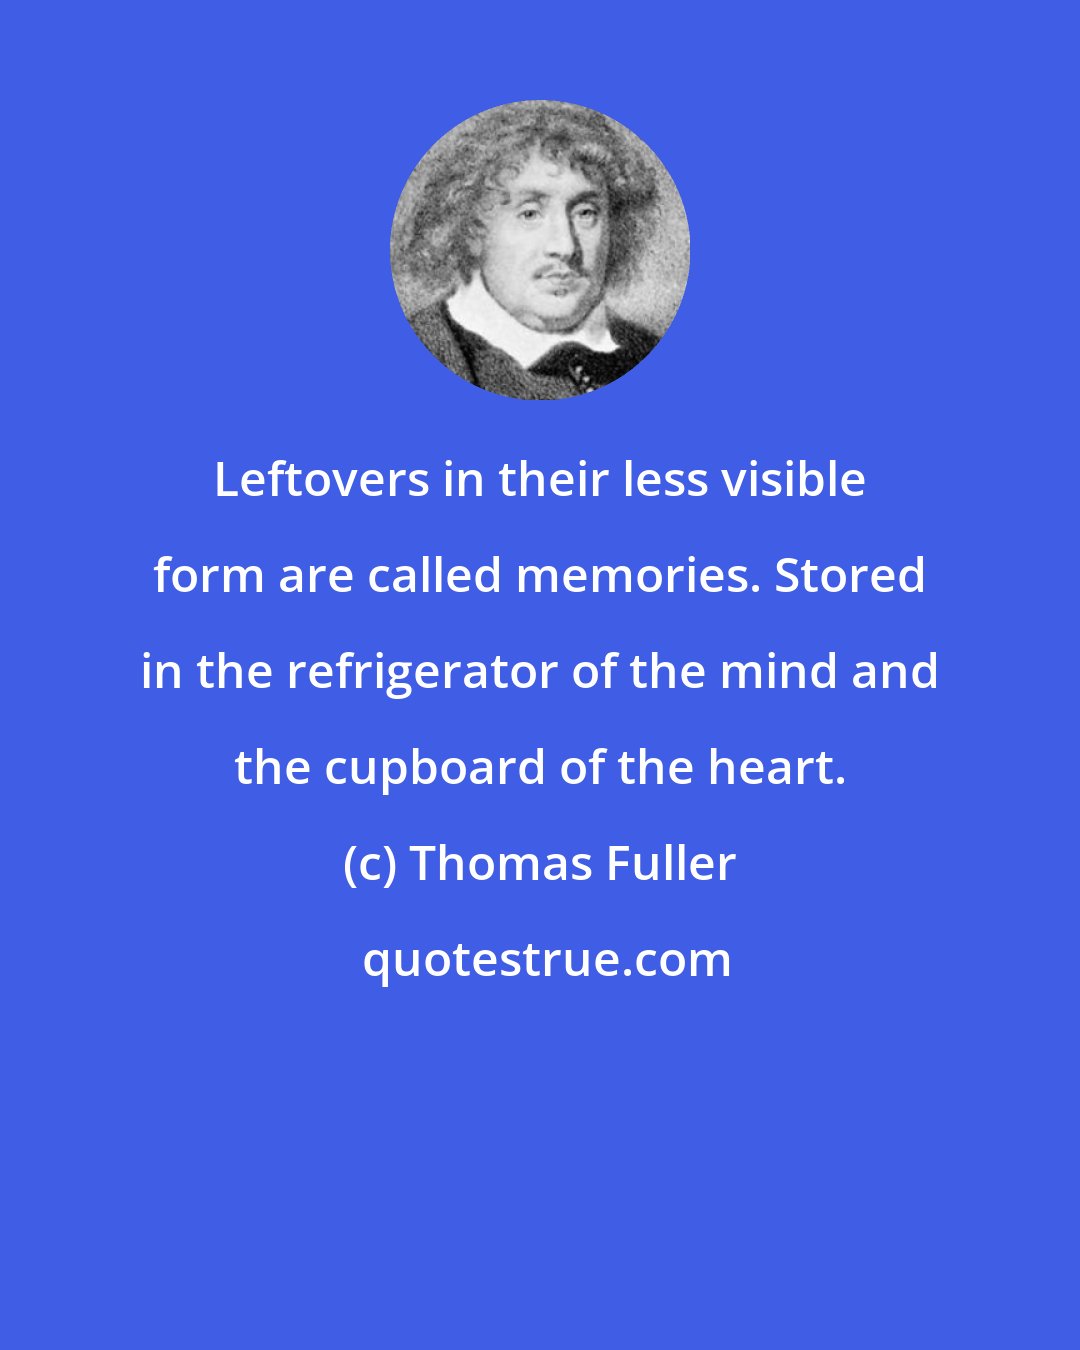 Thomas Fuller: Leftovers in their less visible form are called memories. Stored in the refrigerator of the mind and the cupboard of the heart.